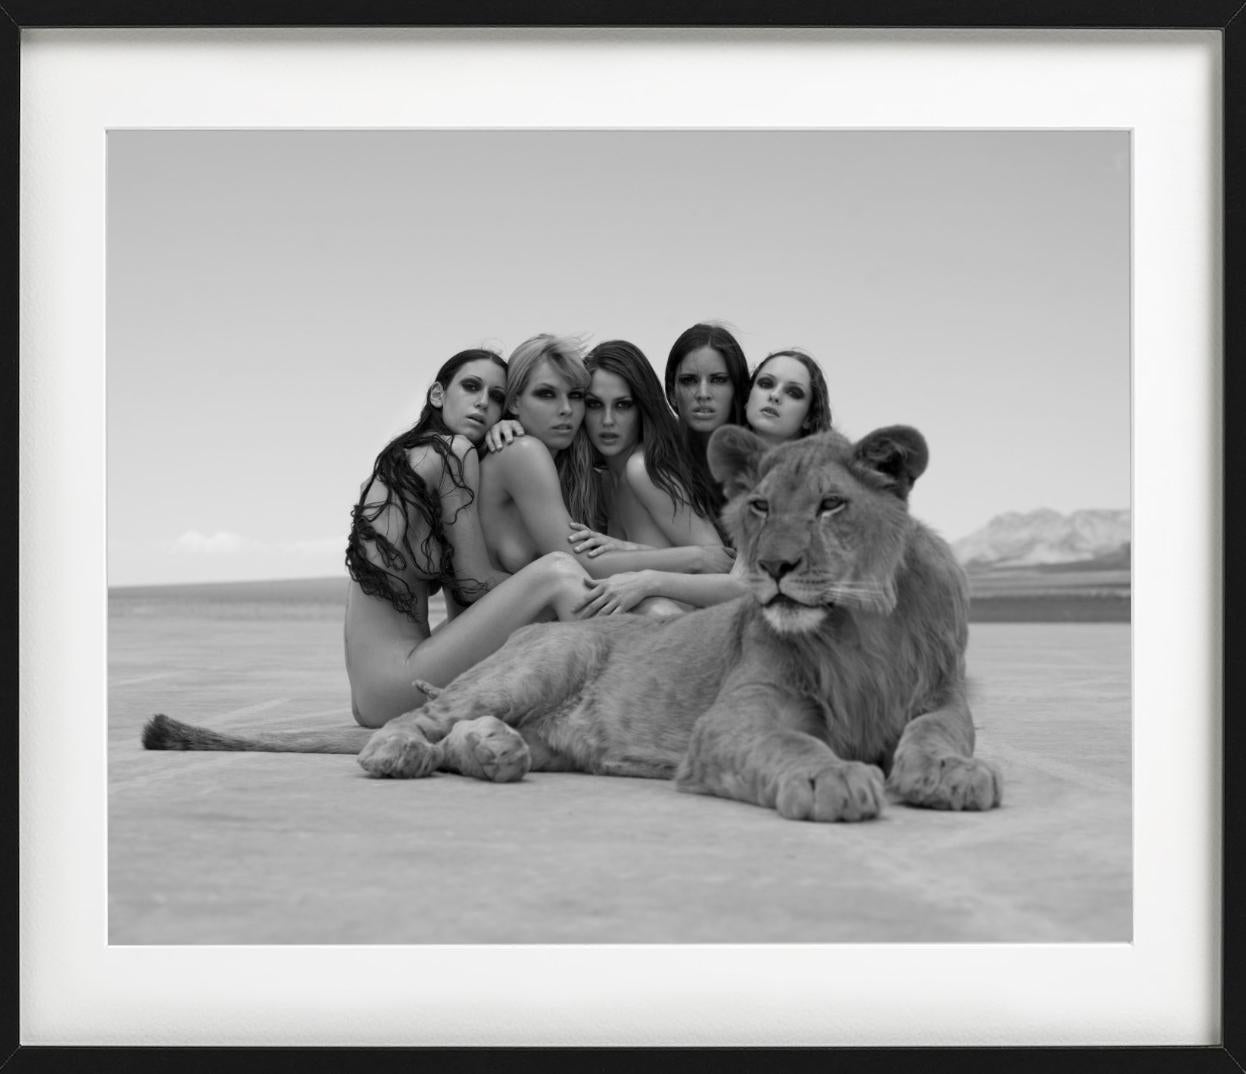 The lion king- group portrait of nude models, posing with a lion in the desert - Contemporary Photograph by Sylvie Blum